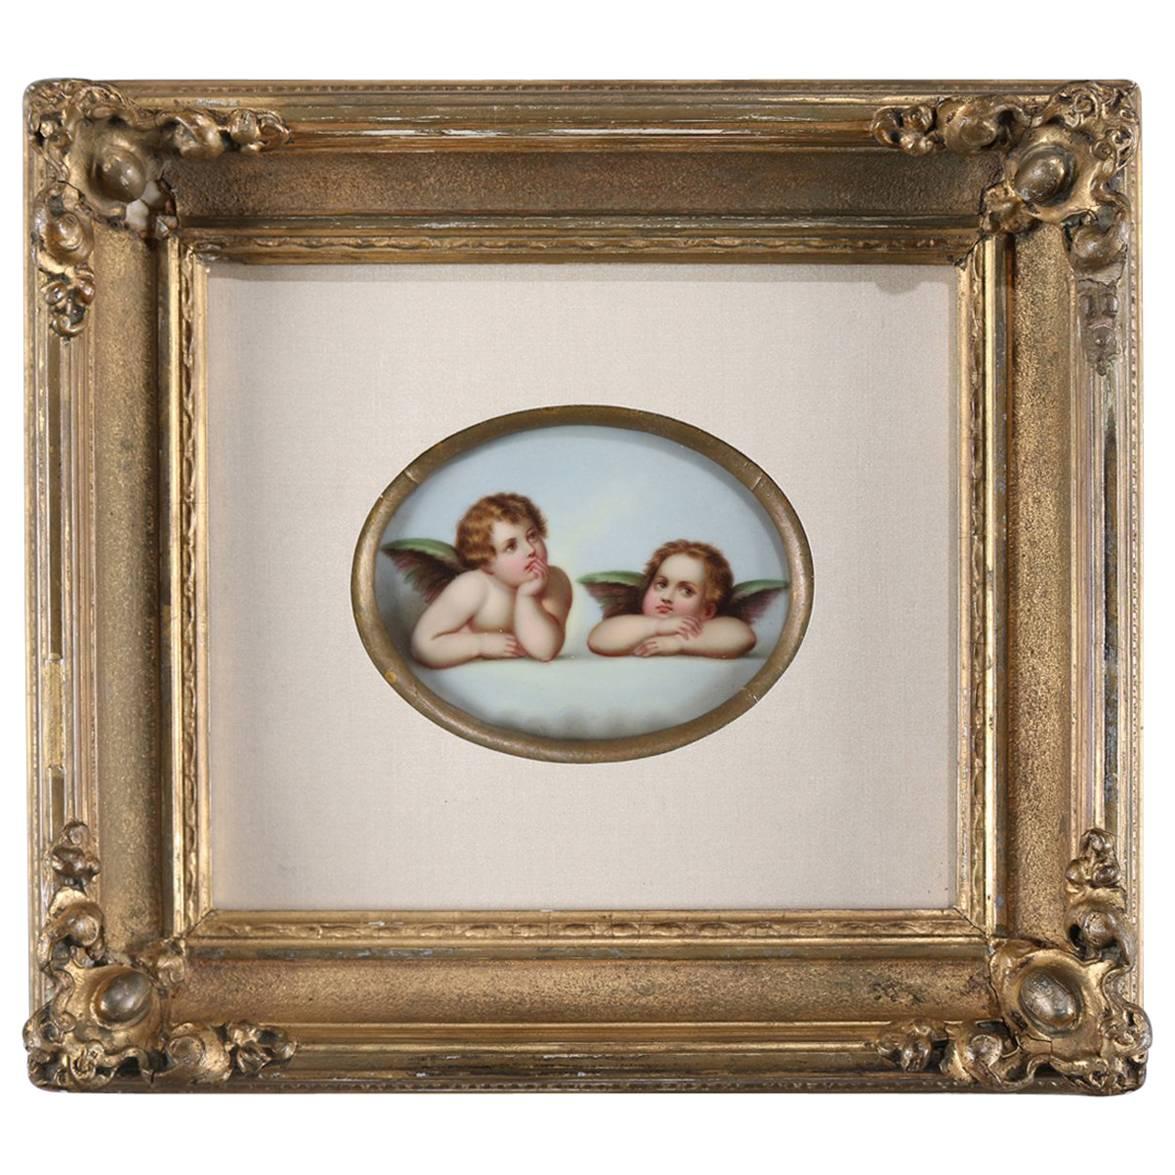 Antique Classical Hand-Painted Porcelain Plaque of Cherubs in Gilt Frame